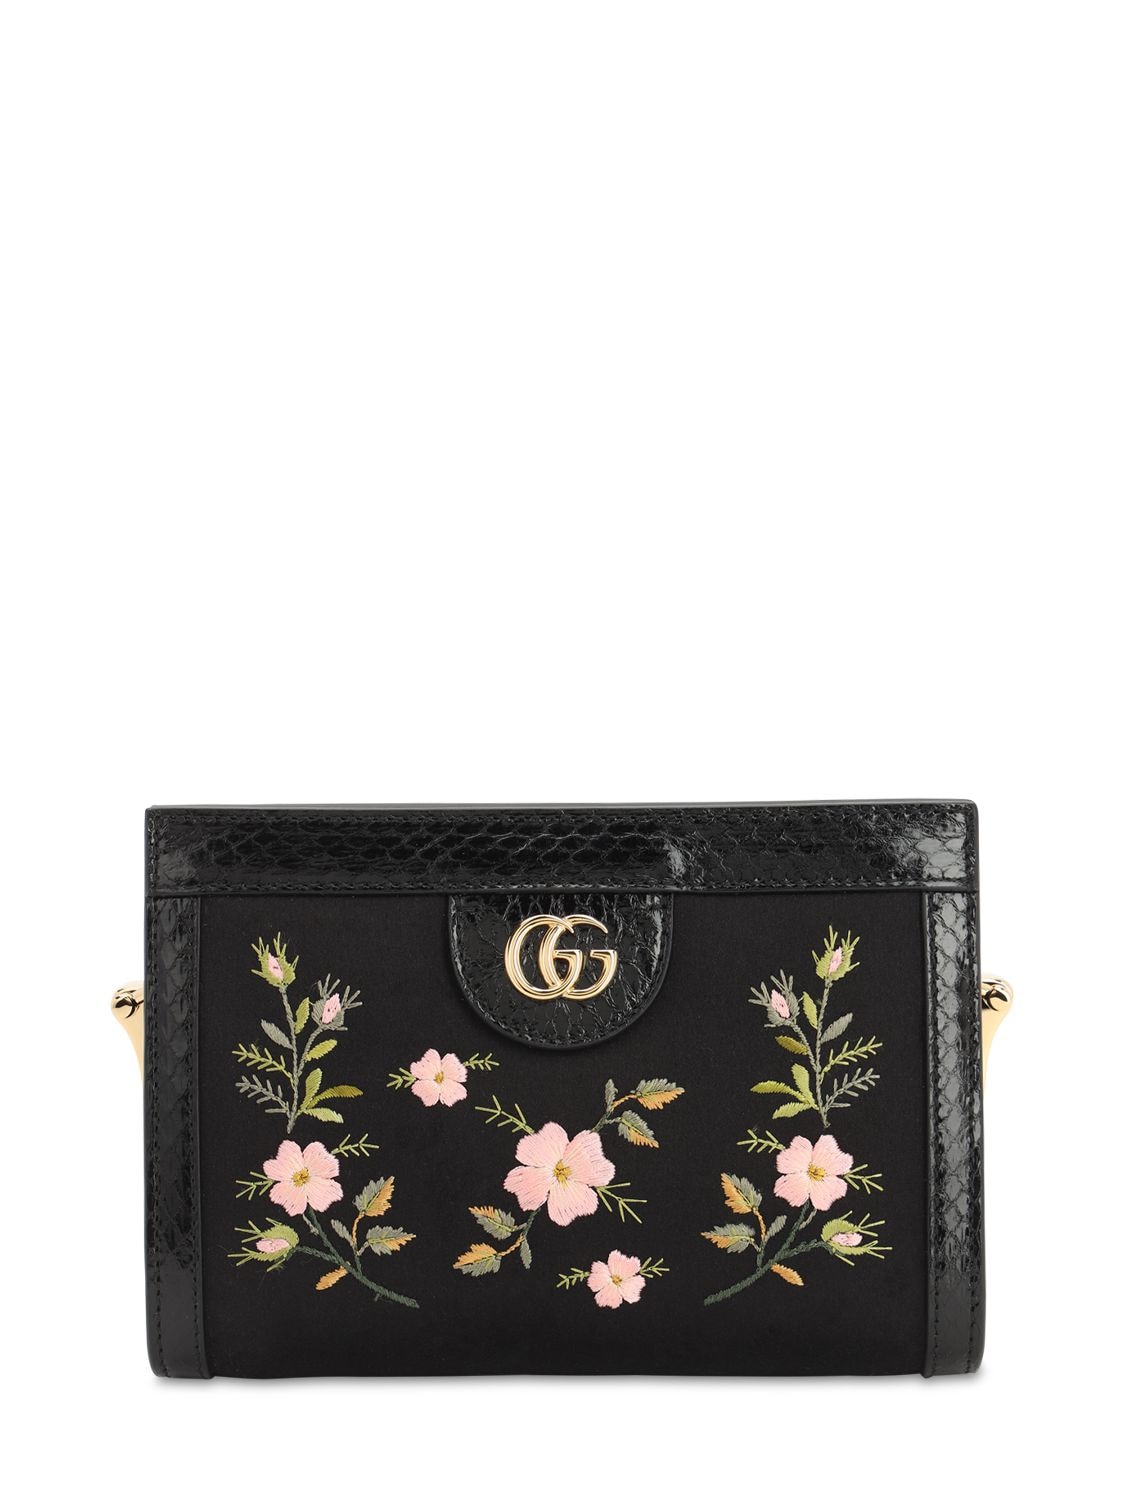 Gucci Ophidia Embroidered Satin Clutch In Black